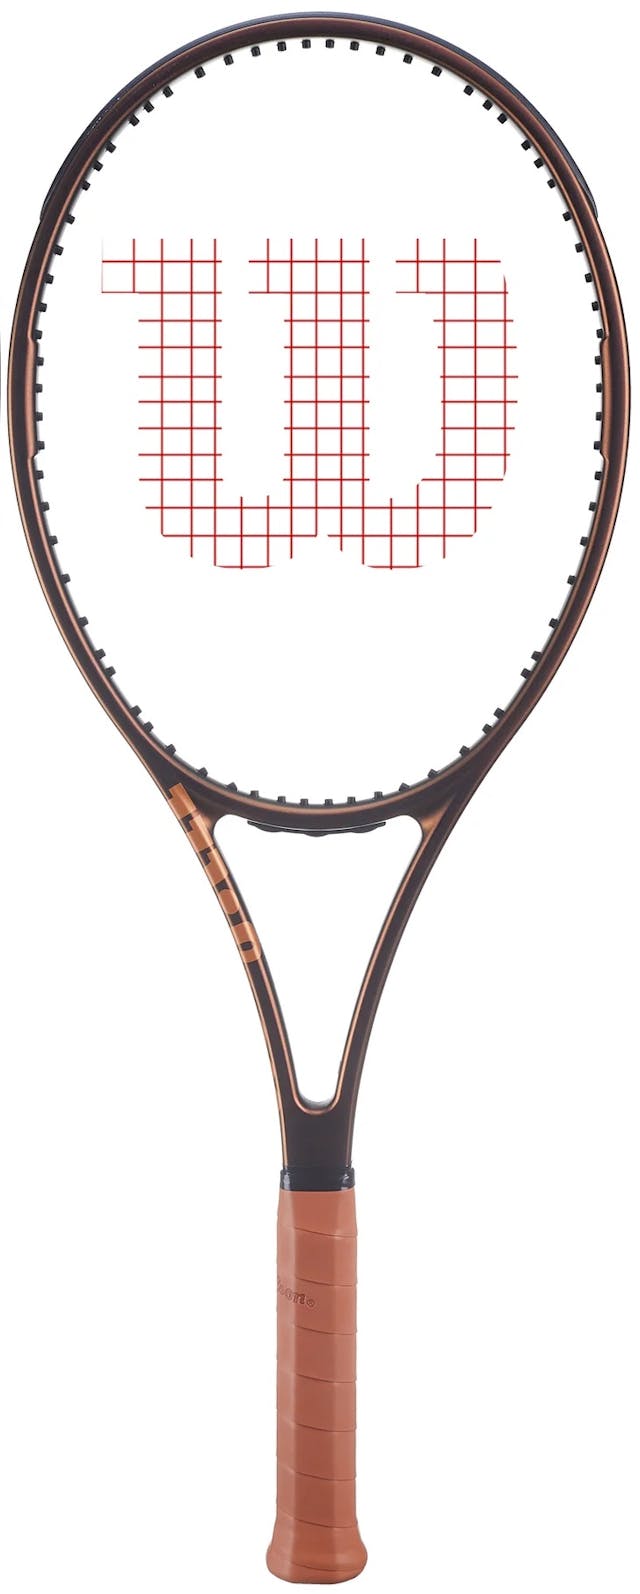 The image for the Wilson Pro Staff 2023